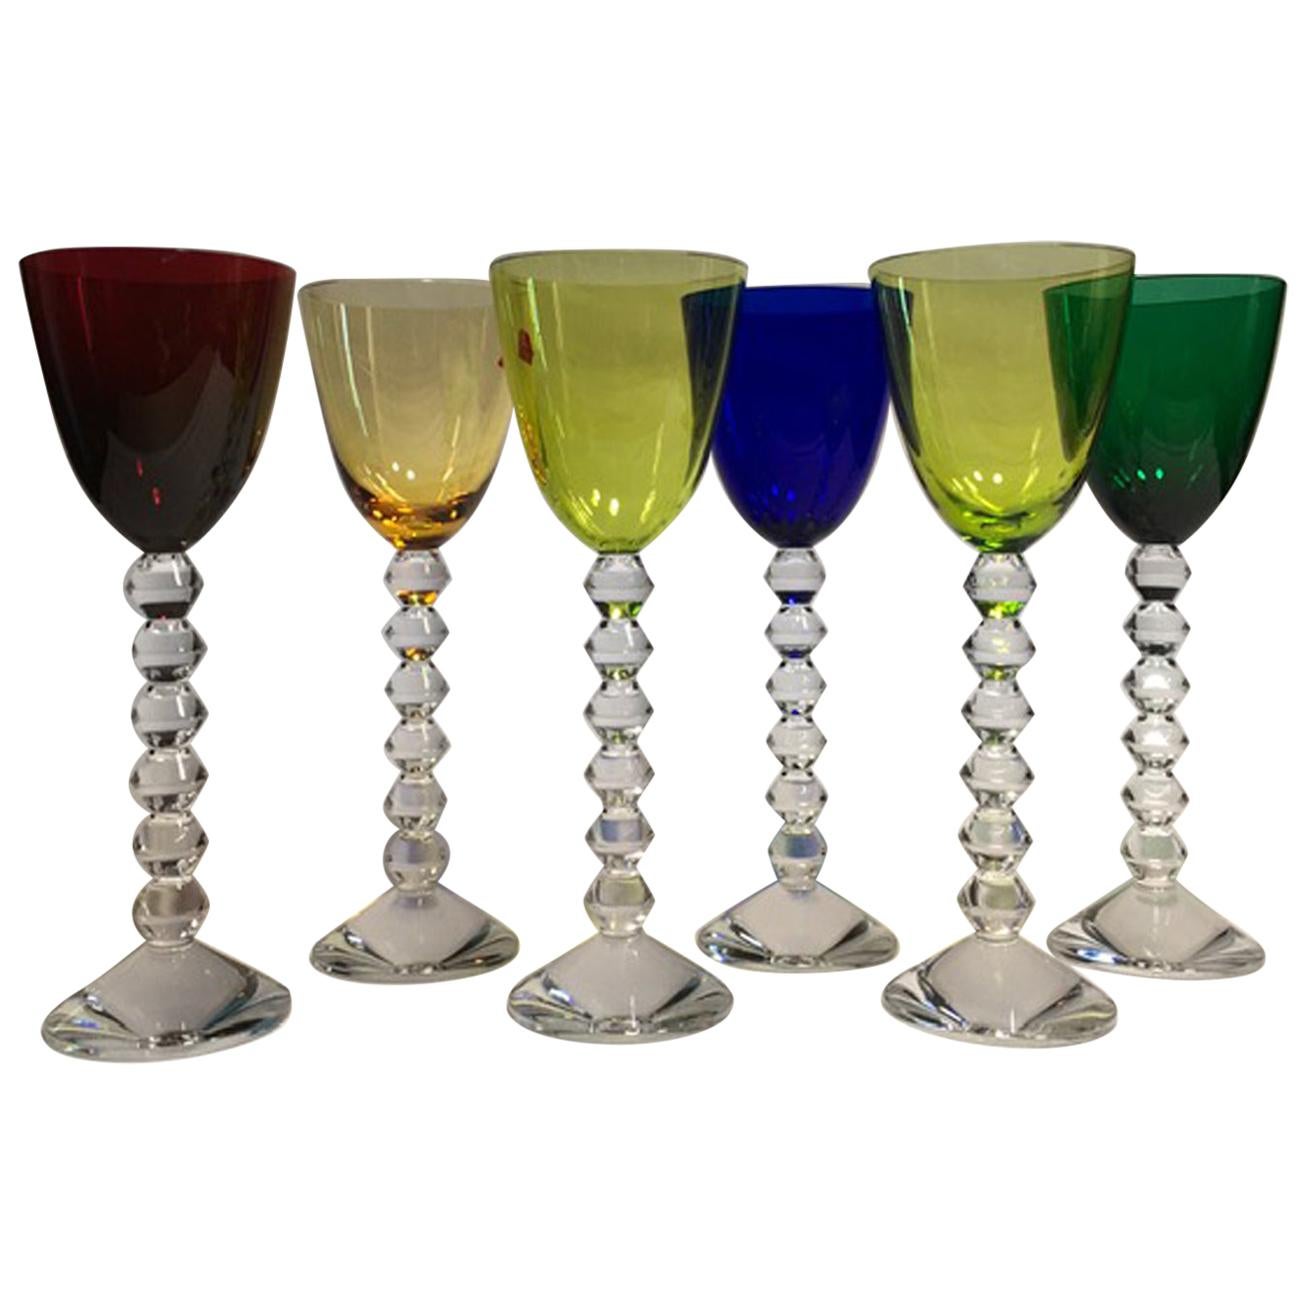 Set of 6 Baccarat Crystal Glasses in Modern Style Green Red Blue